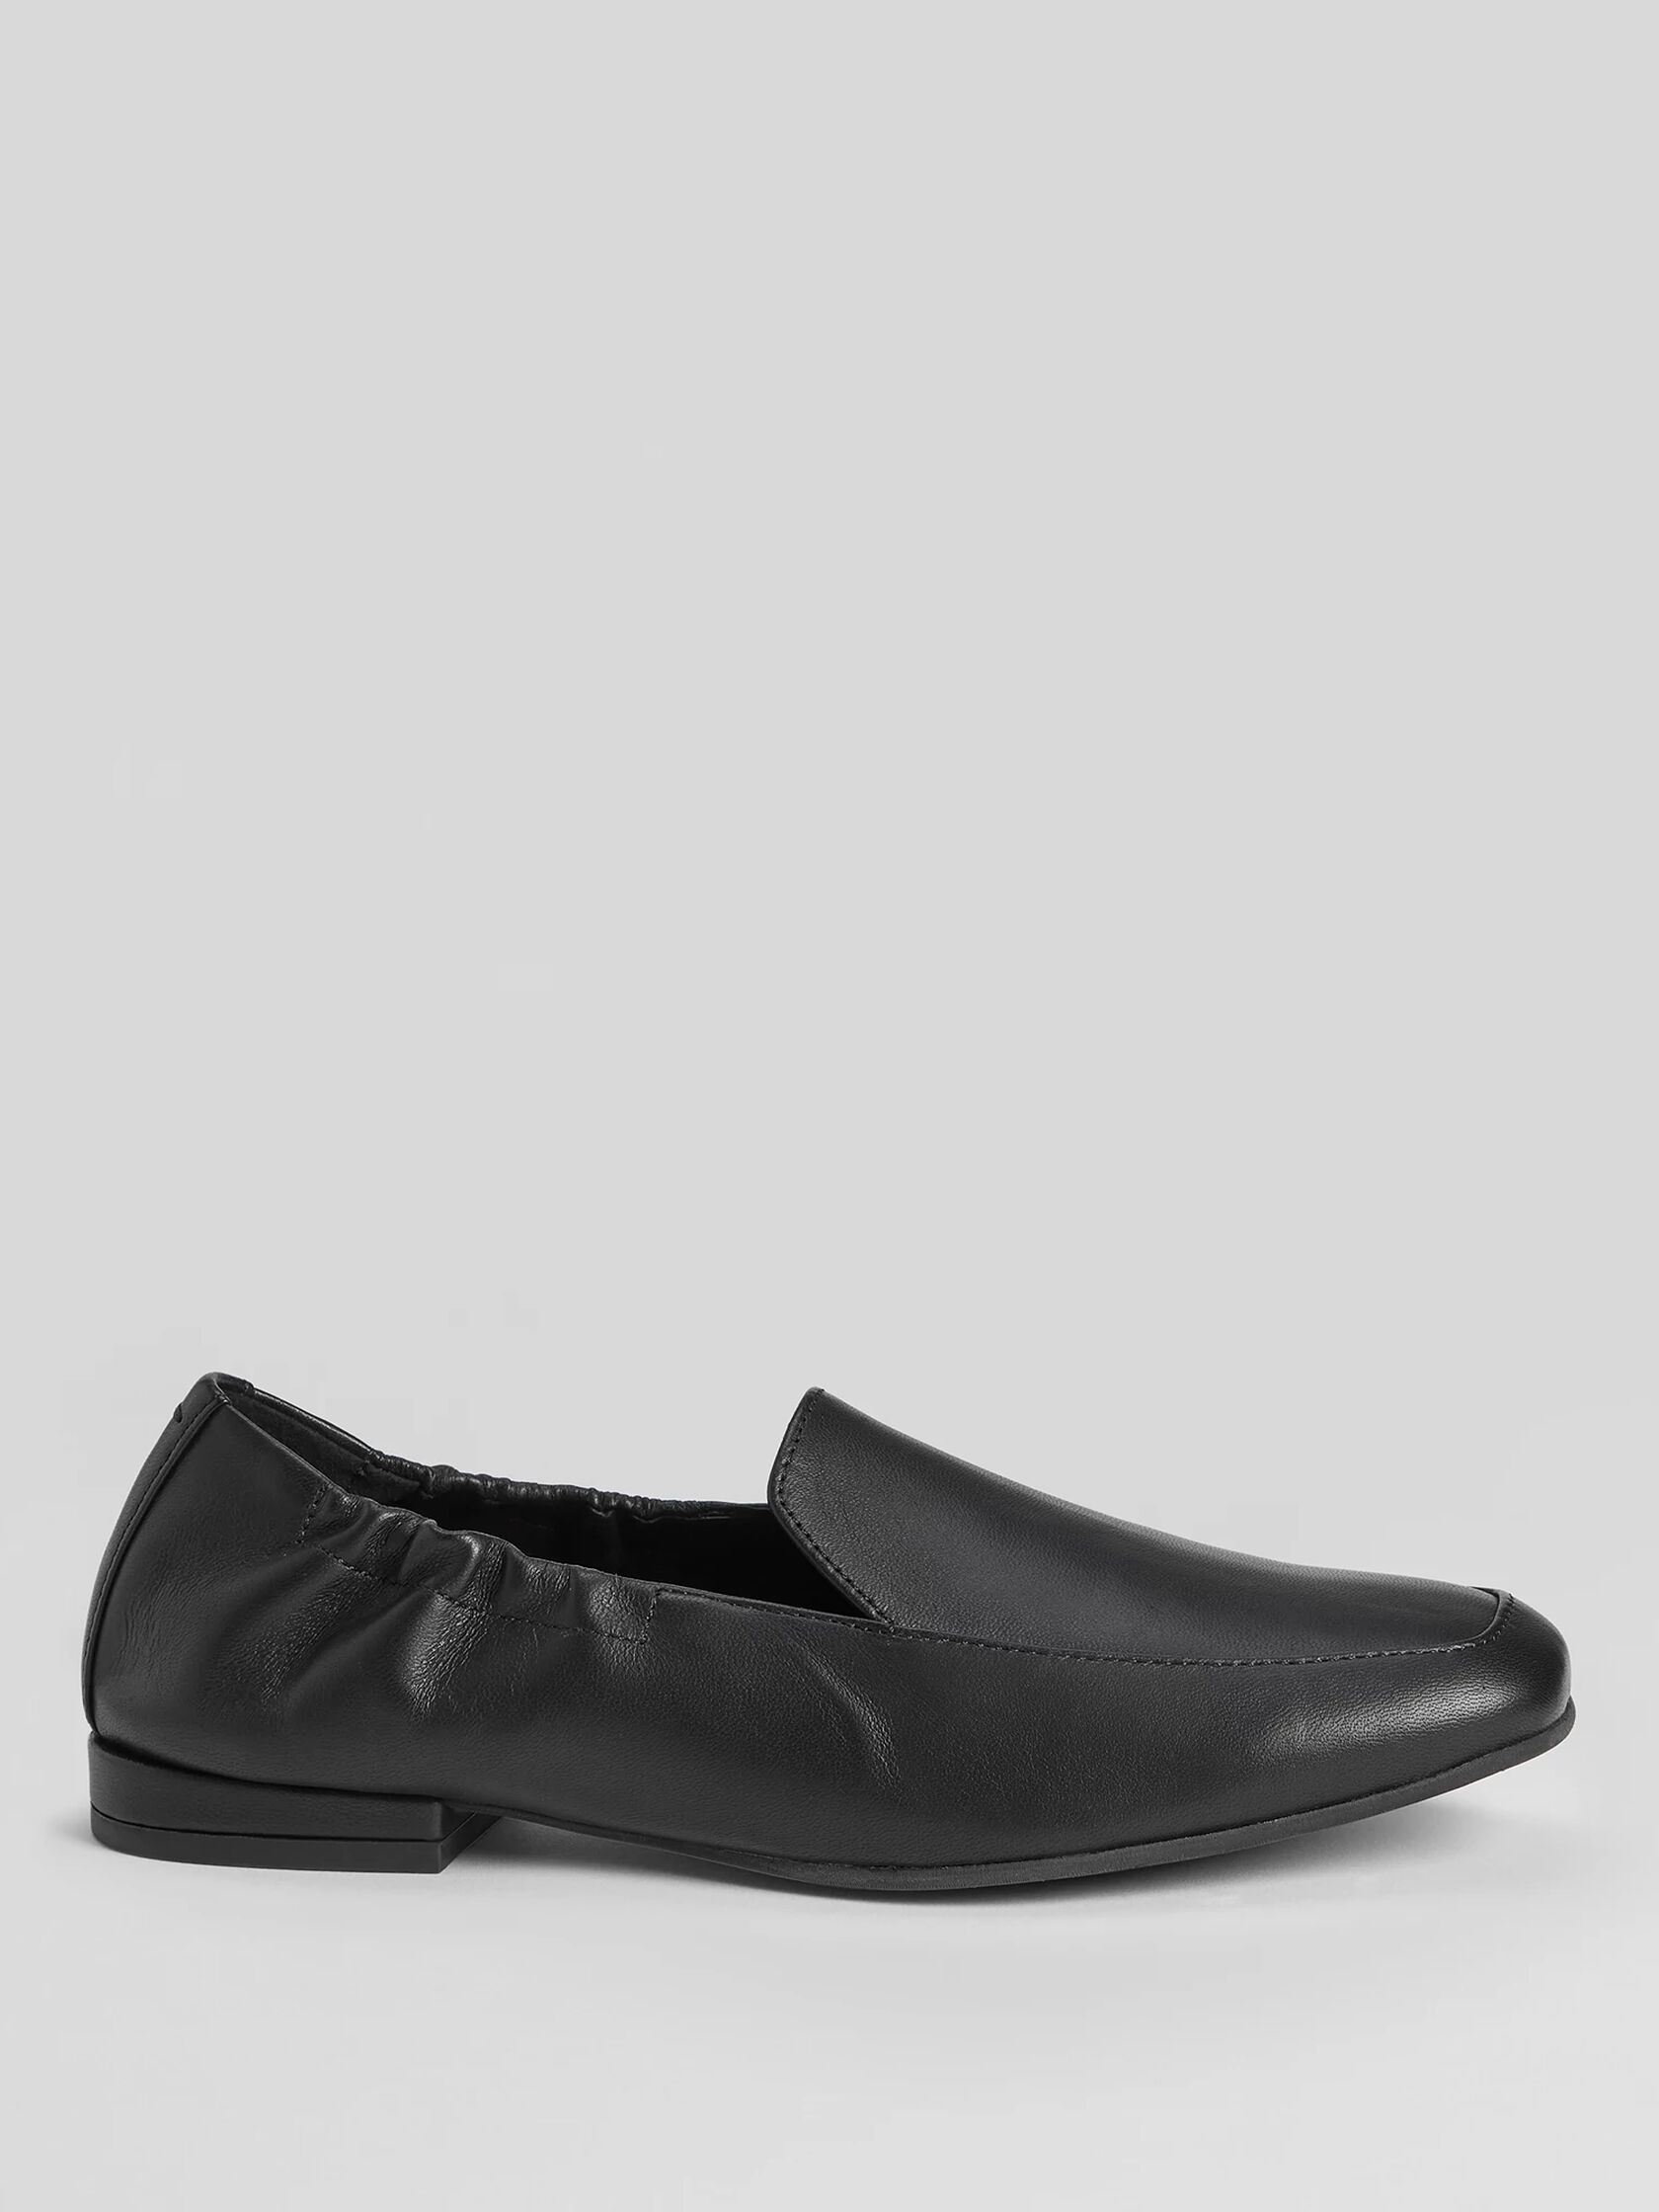 Sim Nappa Leather Loafer | EILEEN FISHER